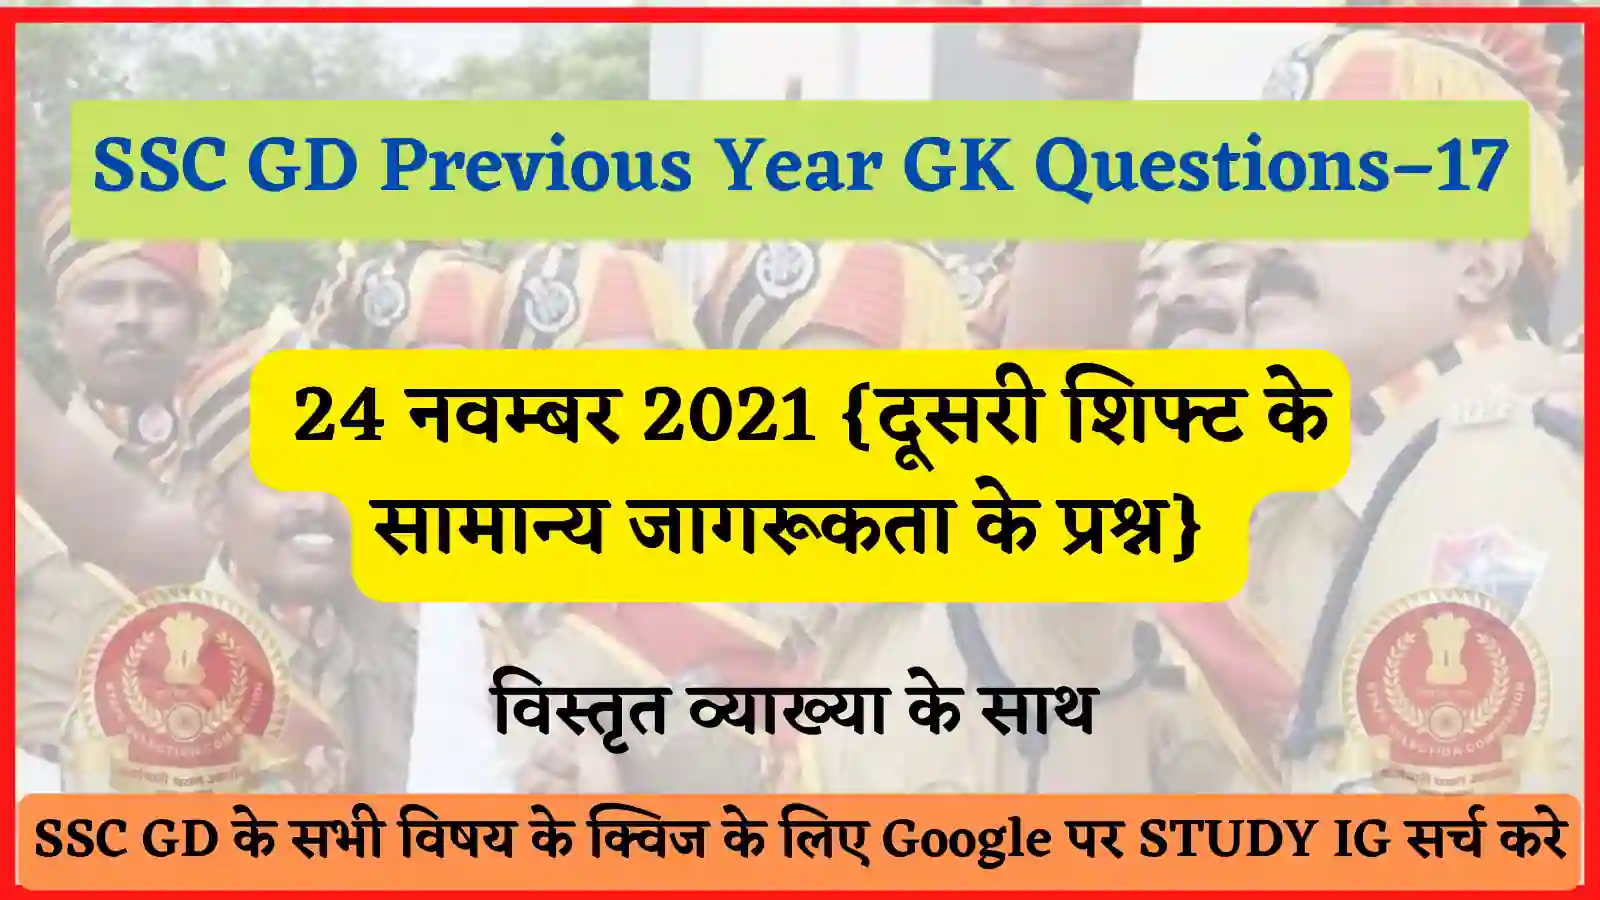 SSC GD Previous Year GK Questions / Quiz - 17